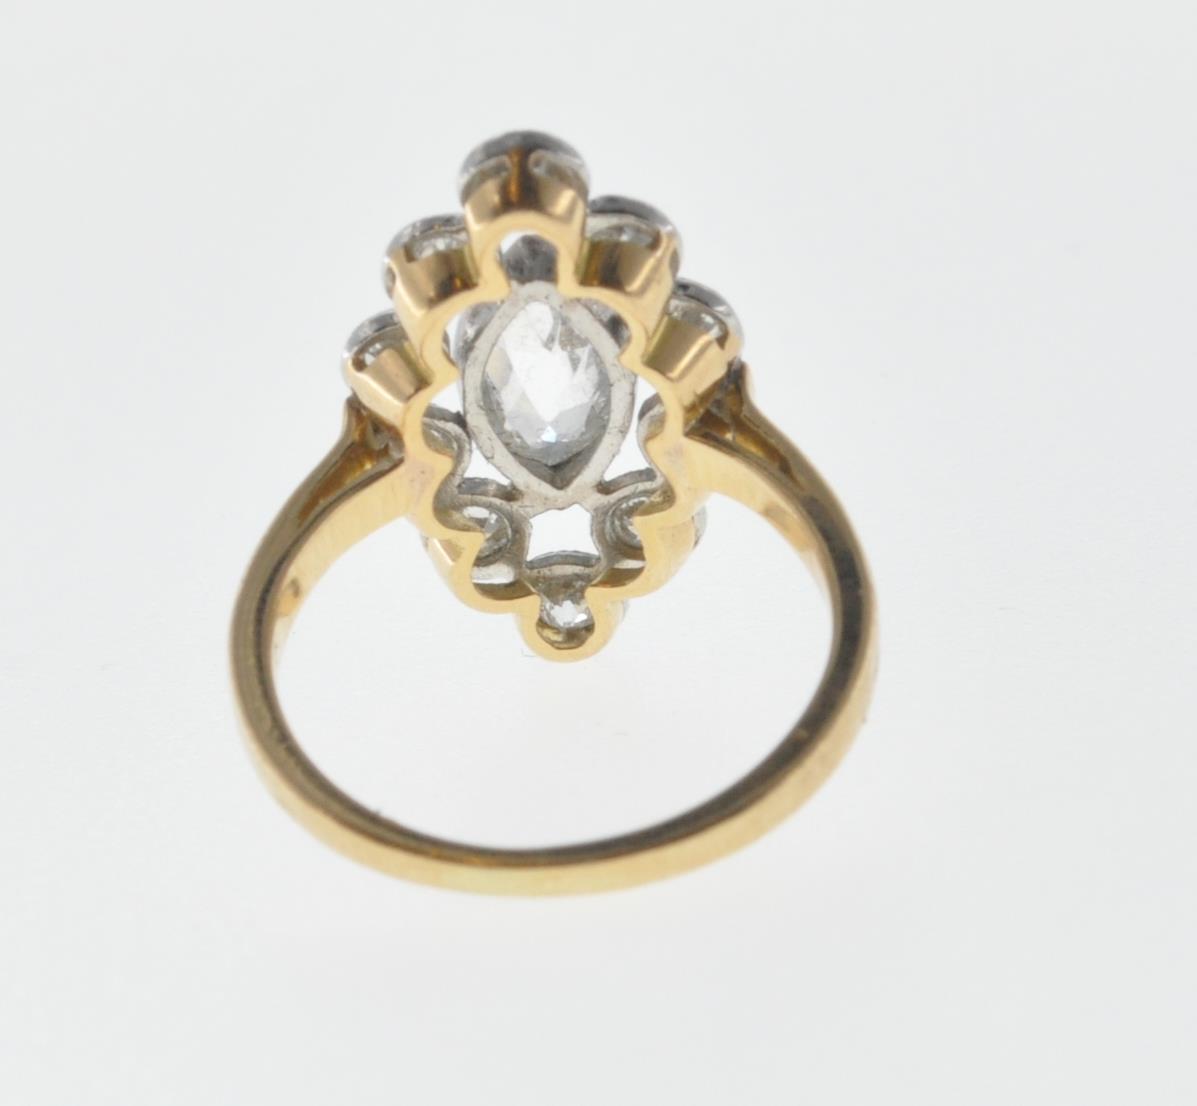 FRENCH GOLD AND DIAMOND MARQUISE RING - Image 5 of 6